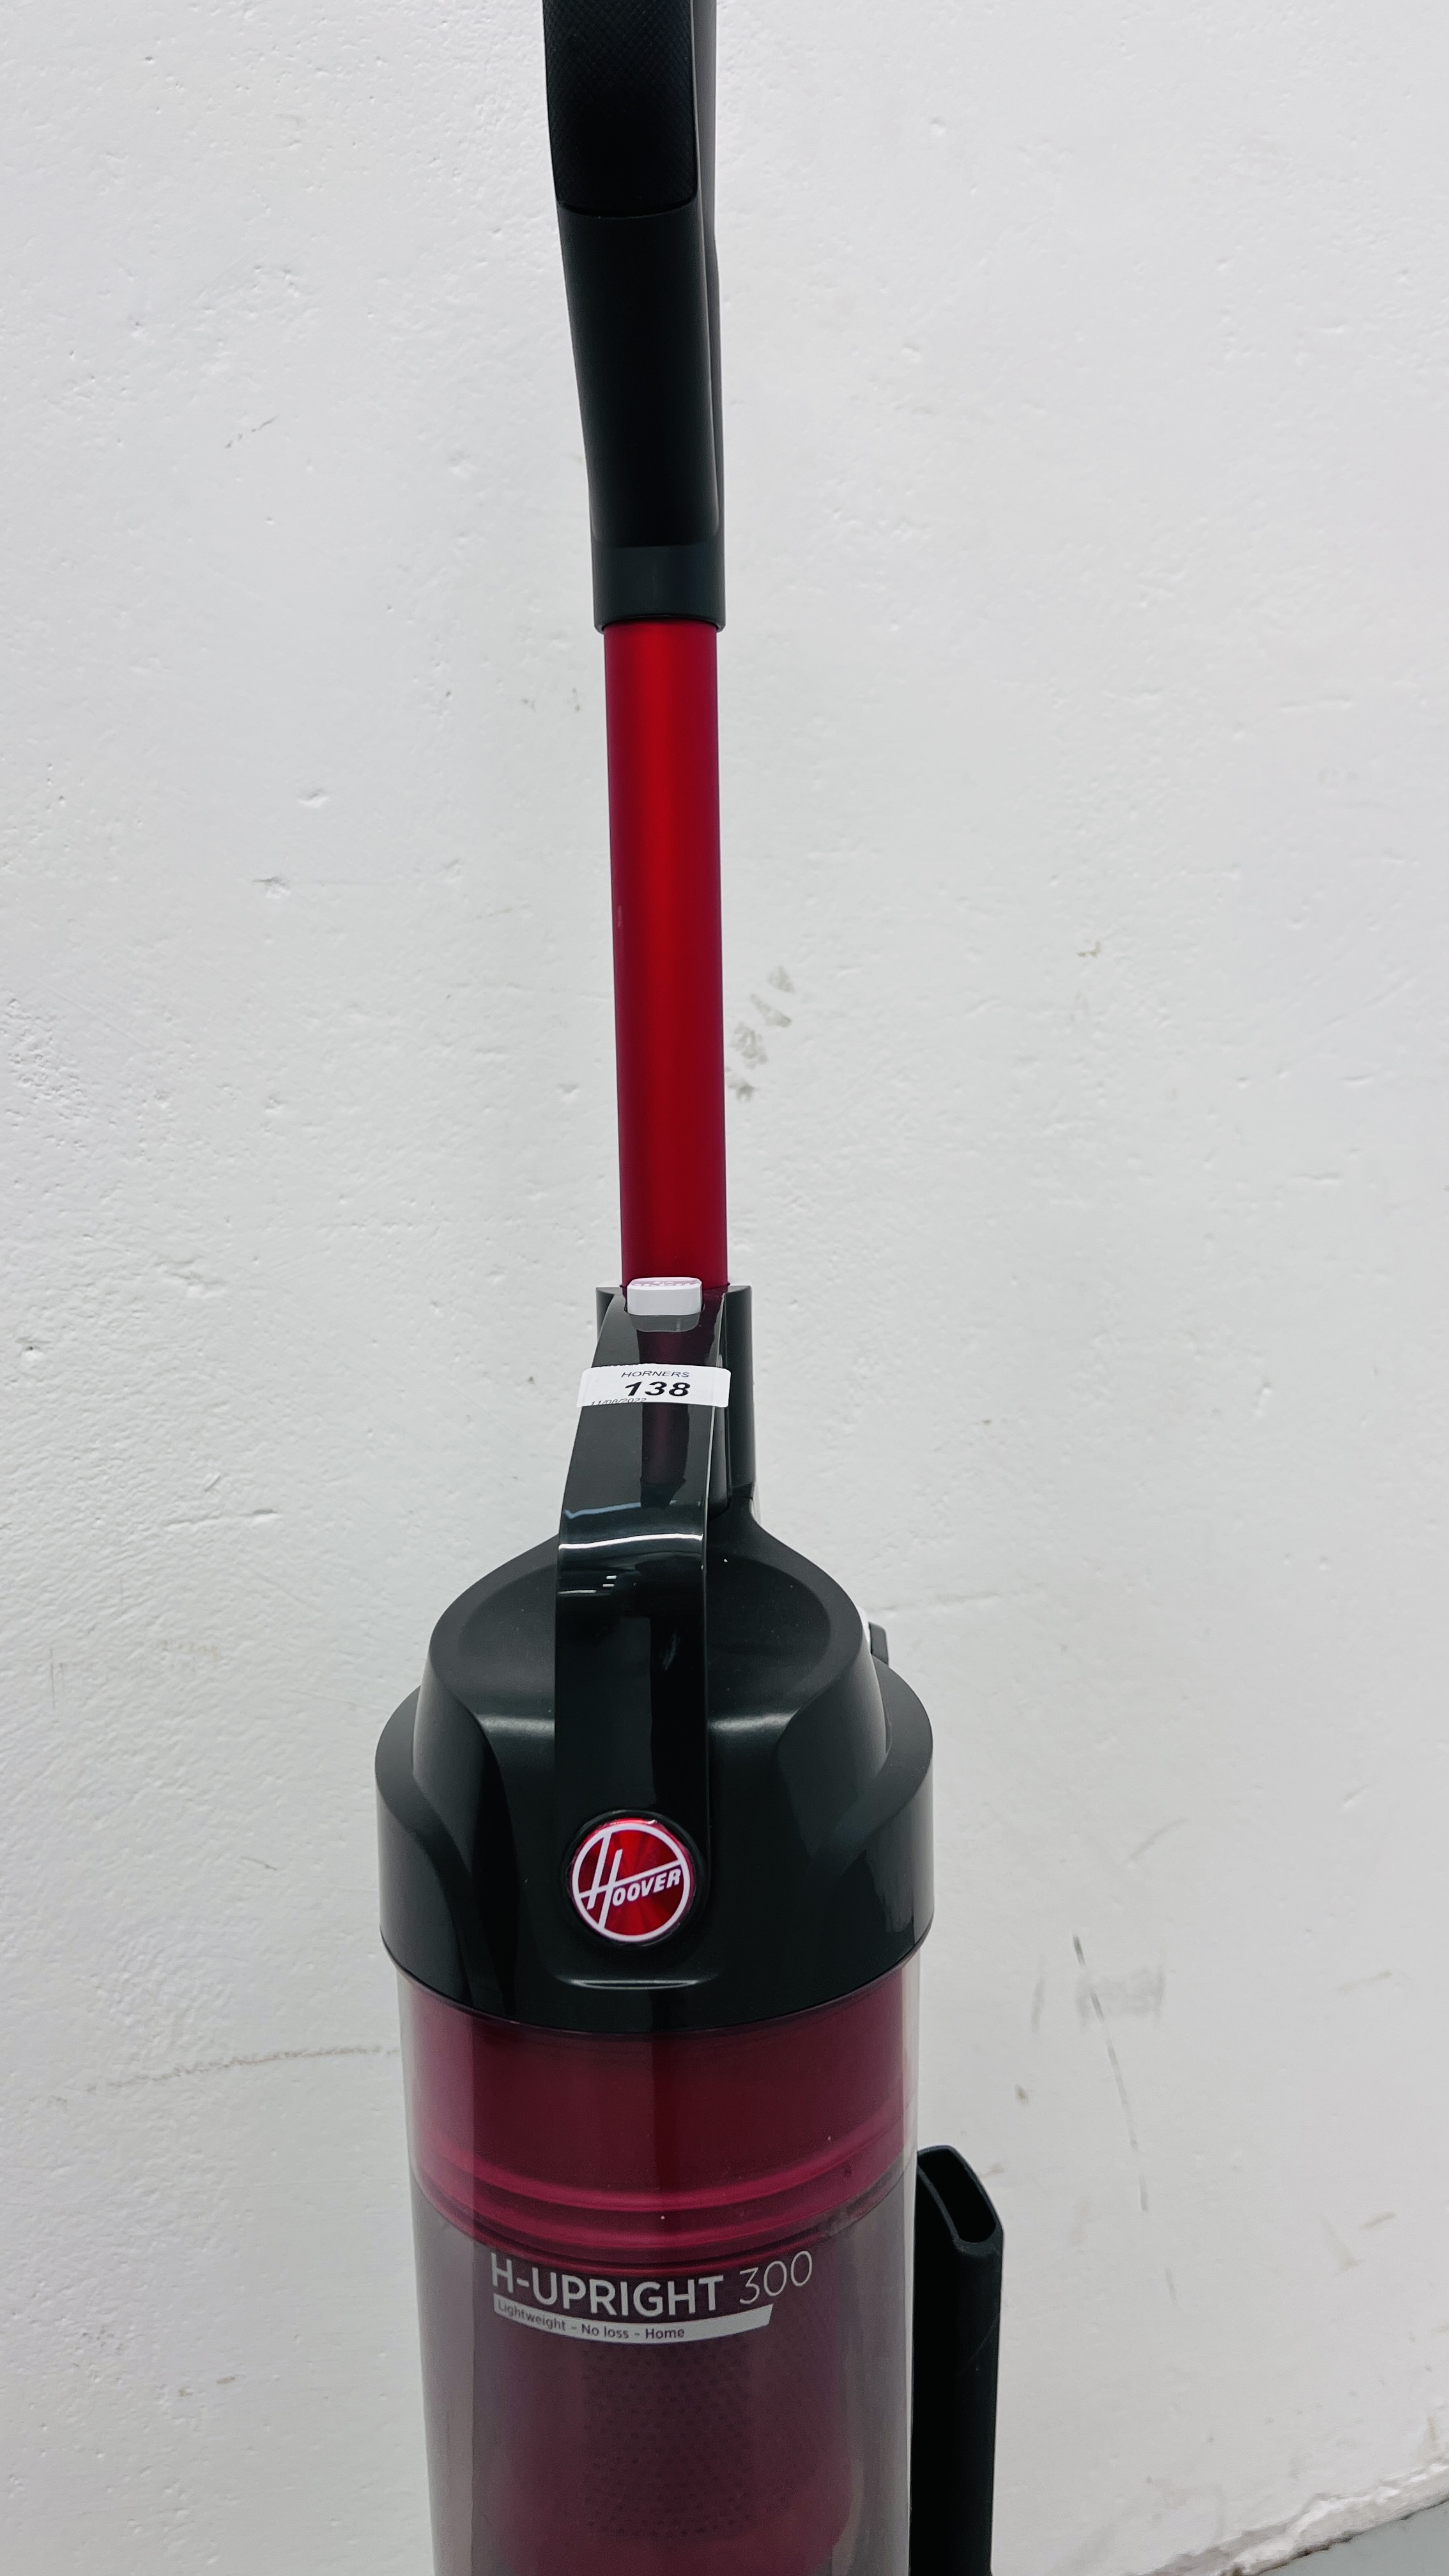 A HOOVER UPRIGHT 300 VACUUM CLEANER - SOLD AS SEEN. - Image 3 of 6